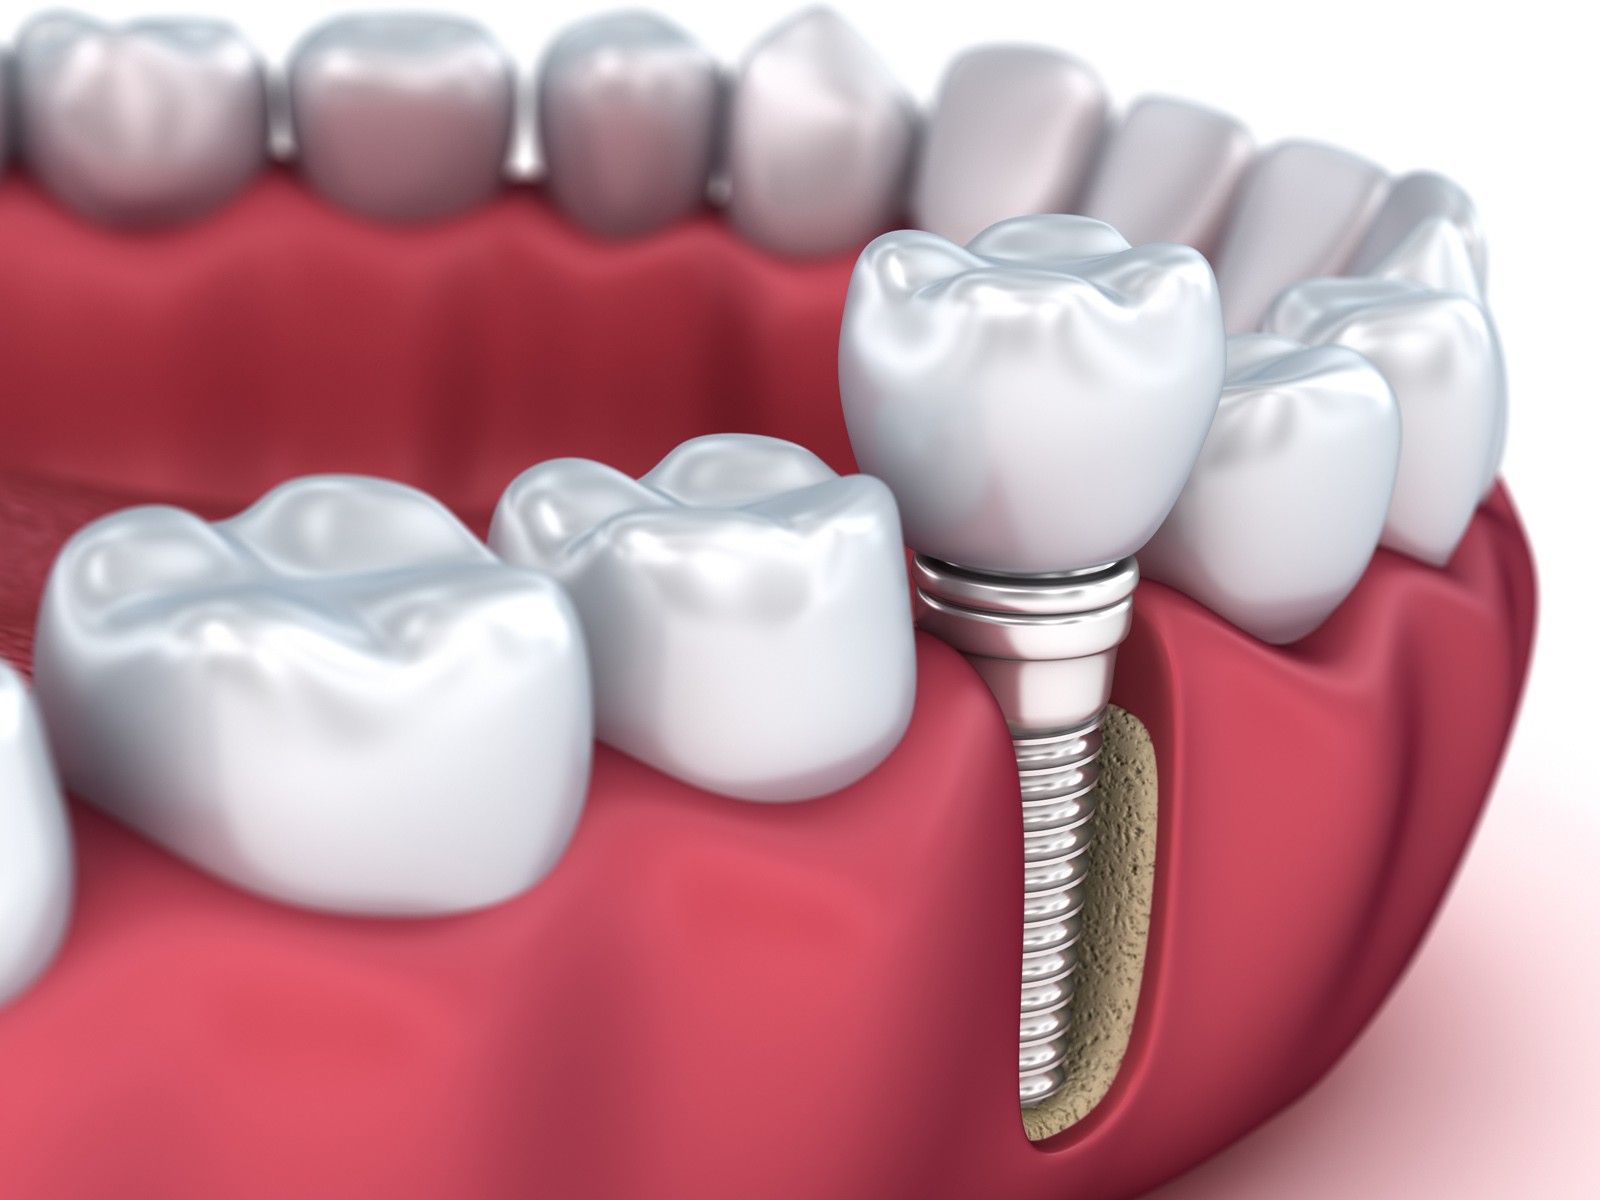 What Are the Advantages of Dental Implants Over Bridges